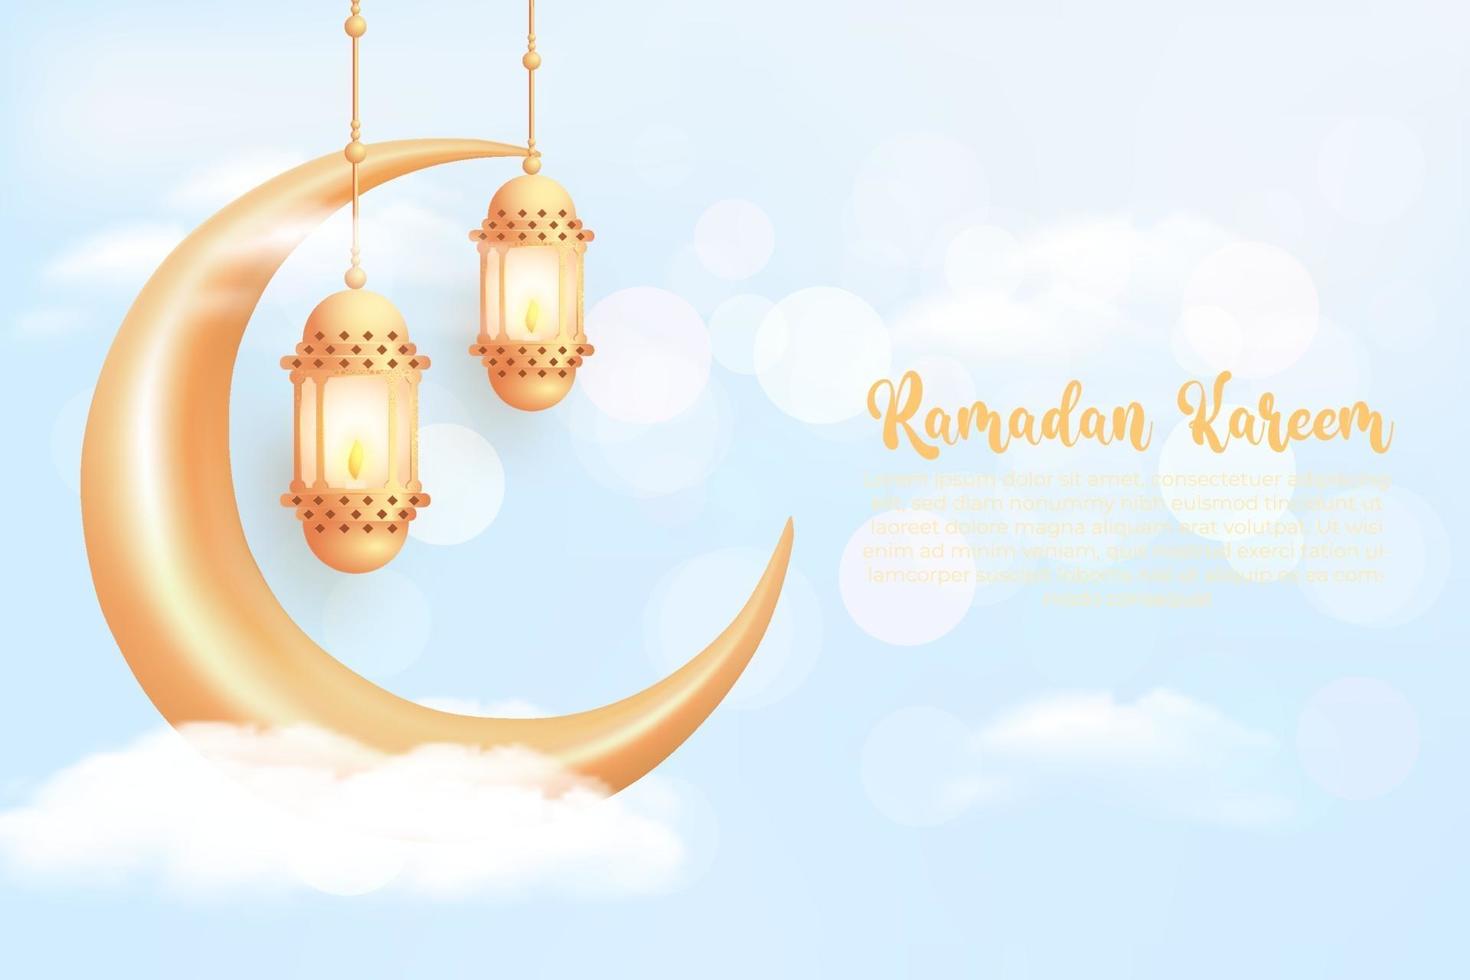 Ramadan kareem background with realistic golden lanterns and crescent moon vector